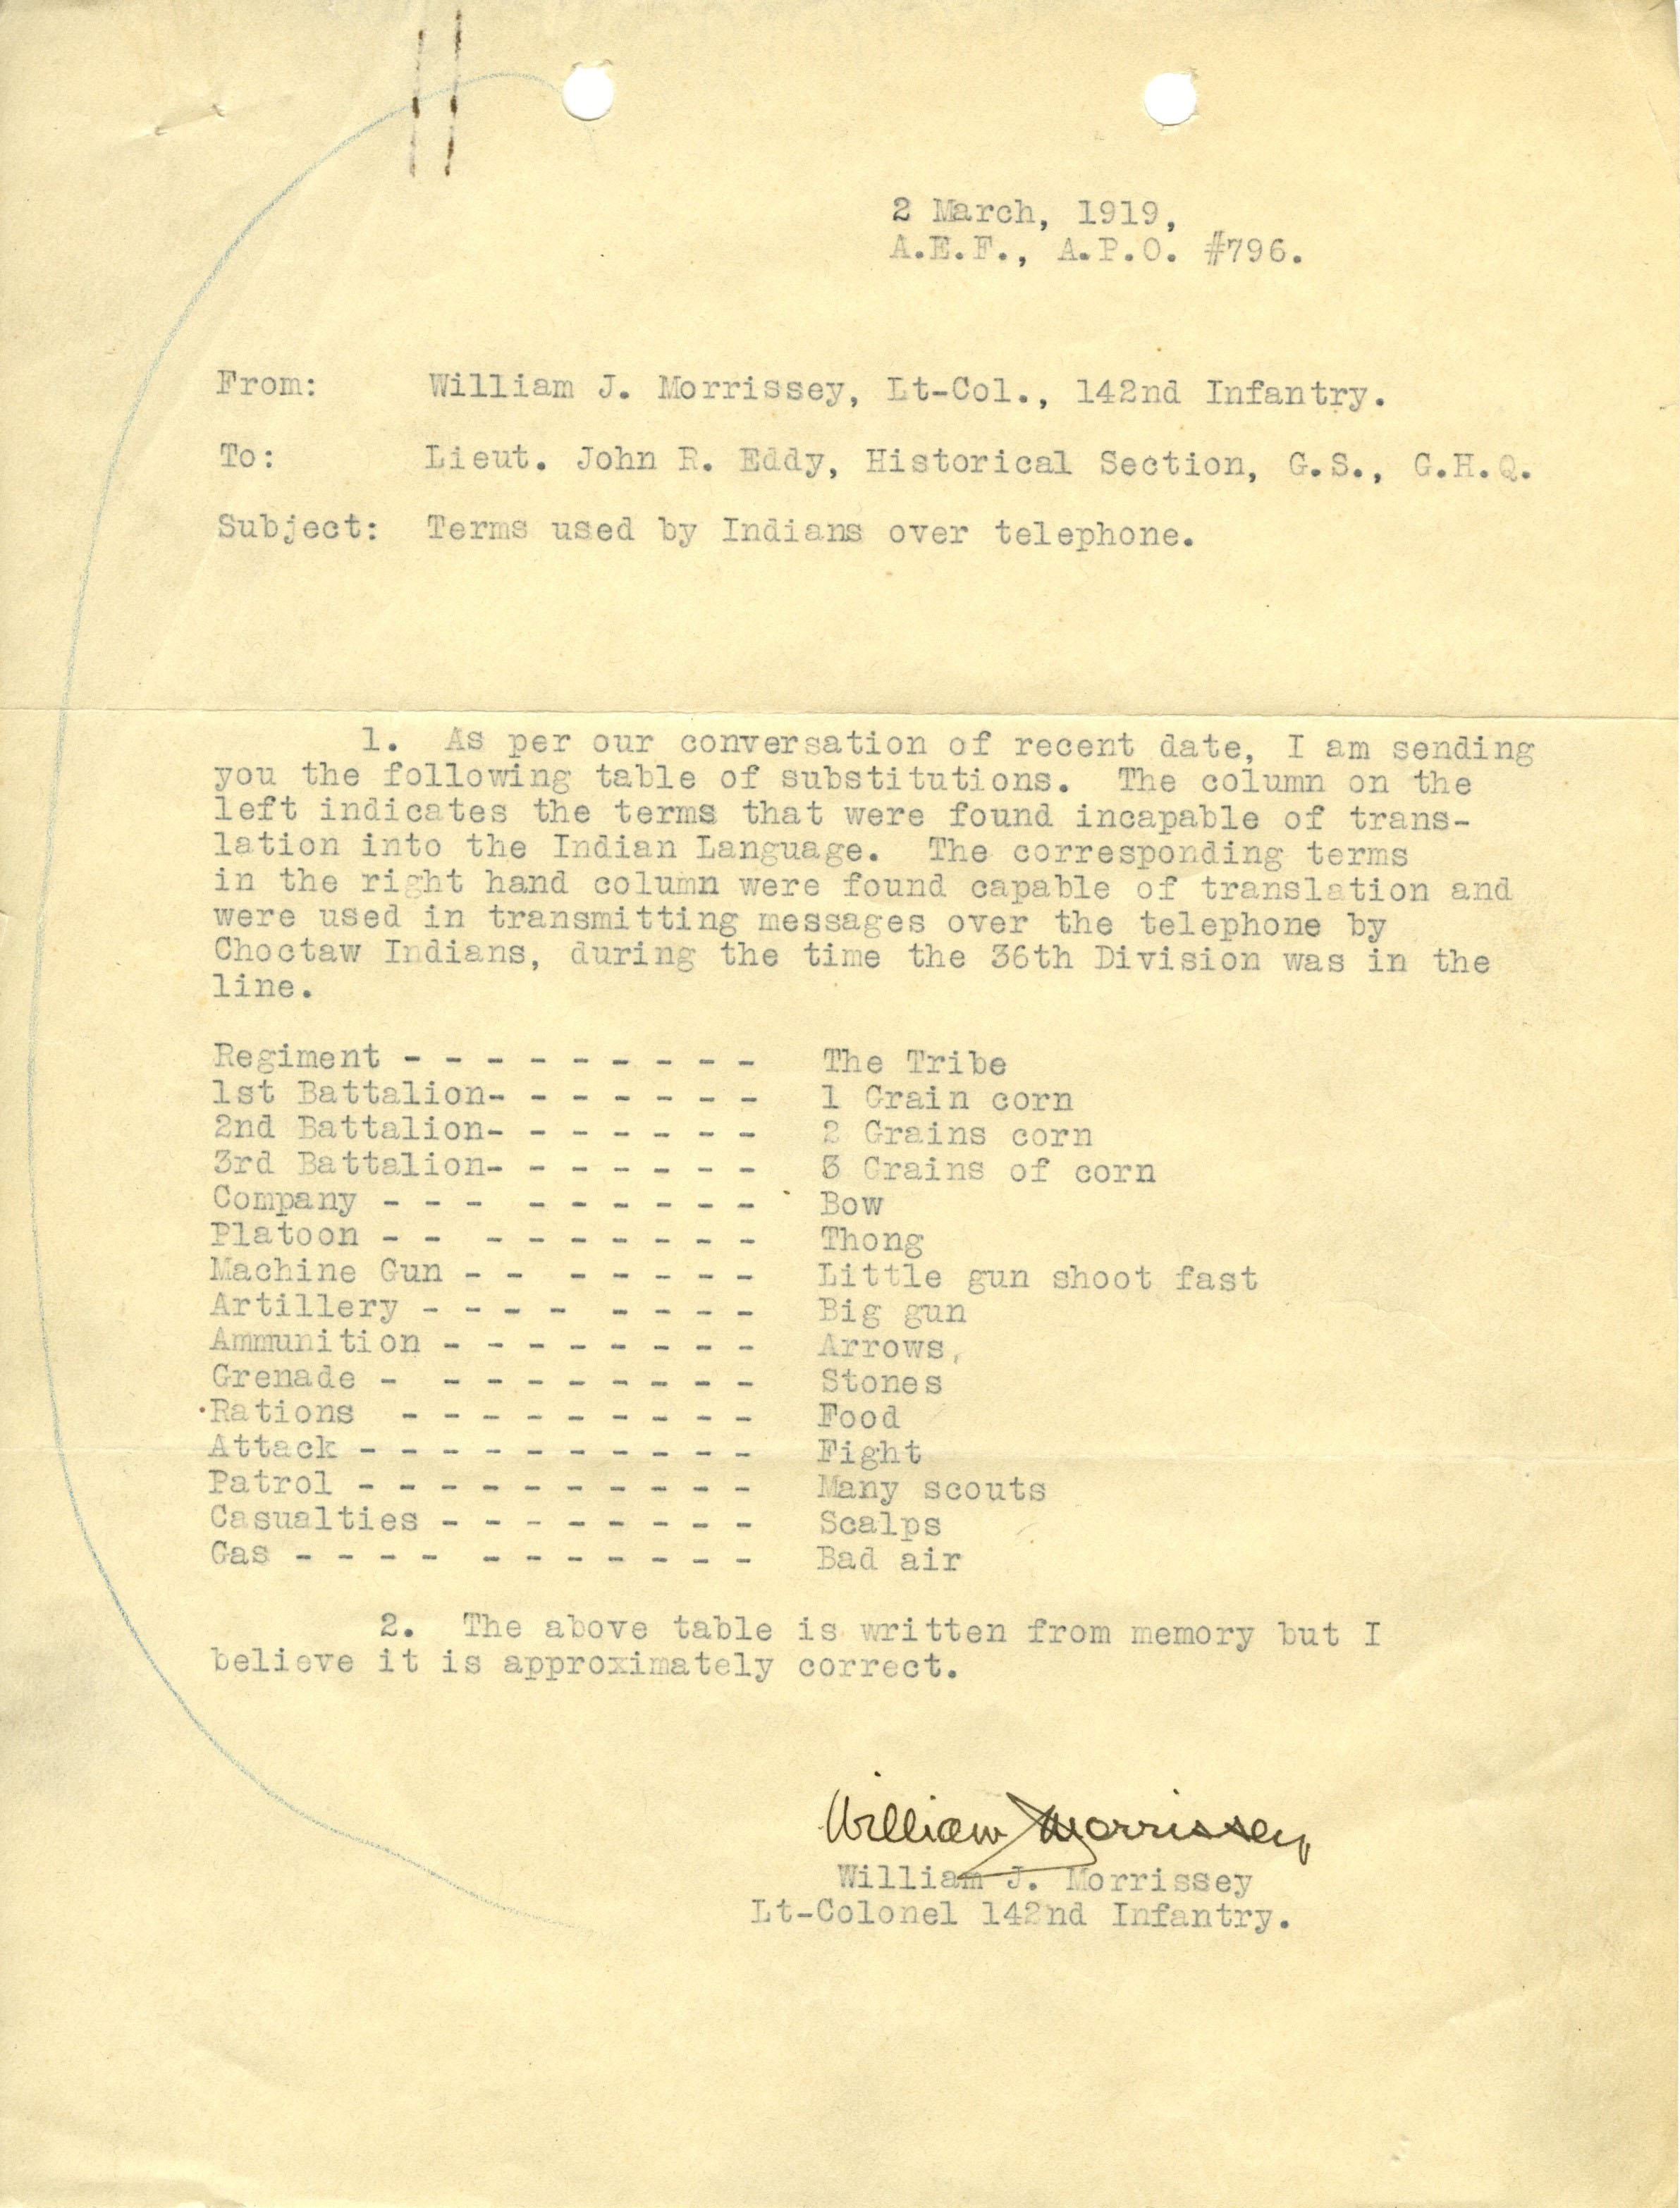 Memo to William J. Morrissey from Lieut. John R. Eddy, 142nd Infantry, March 2, 1919